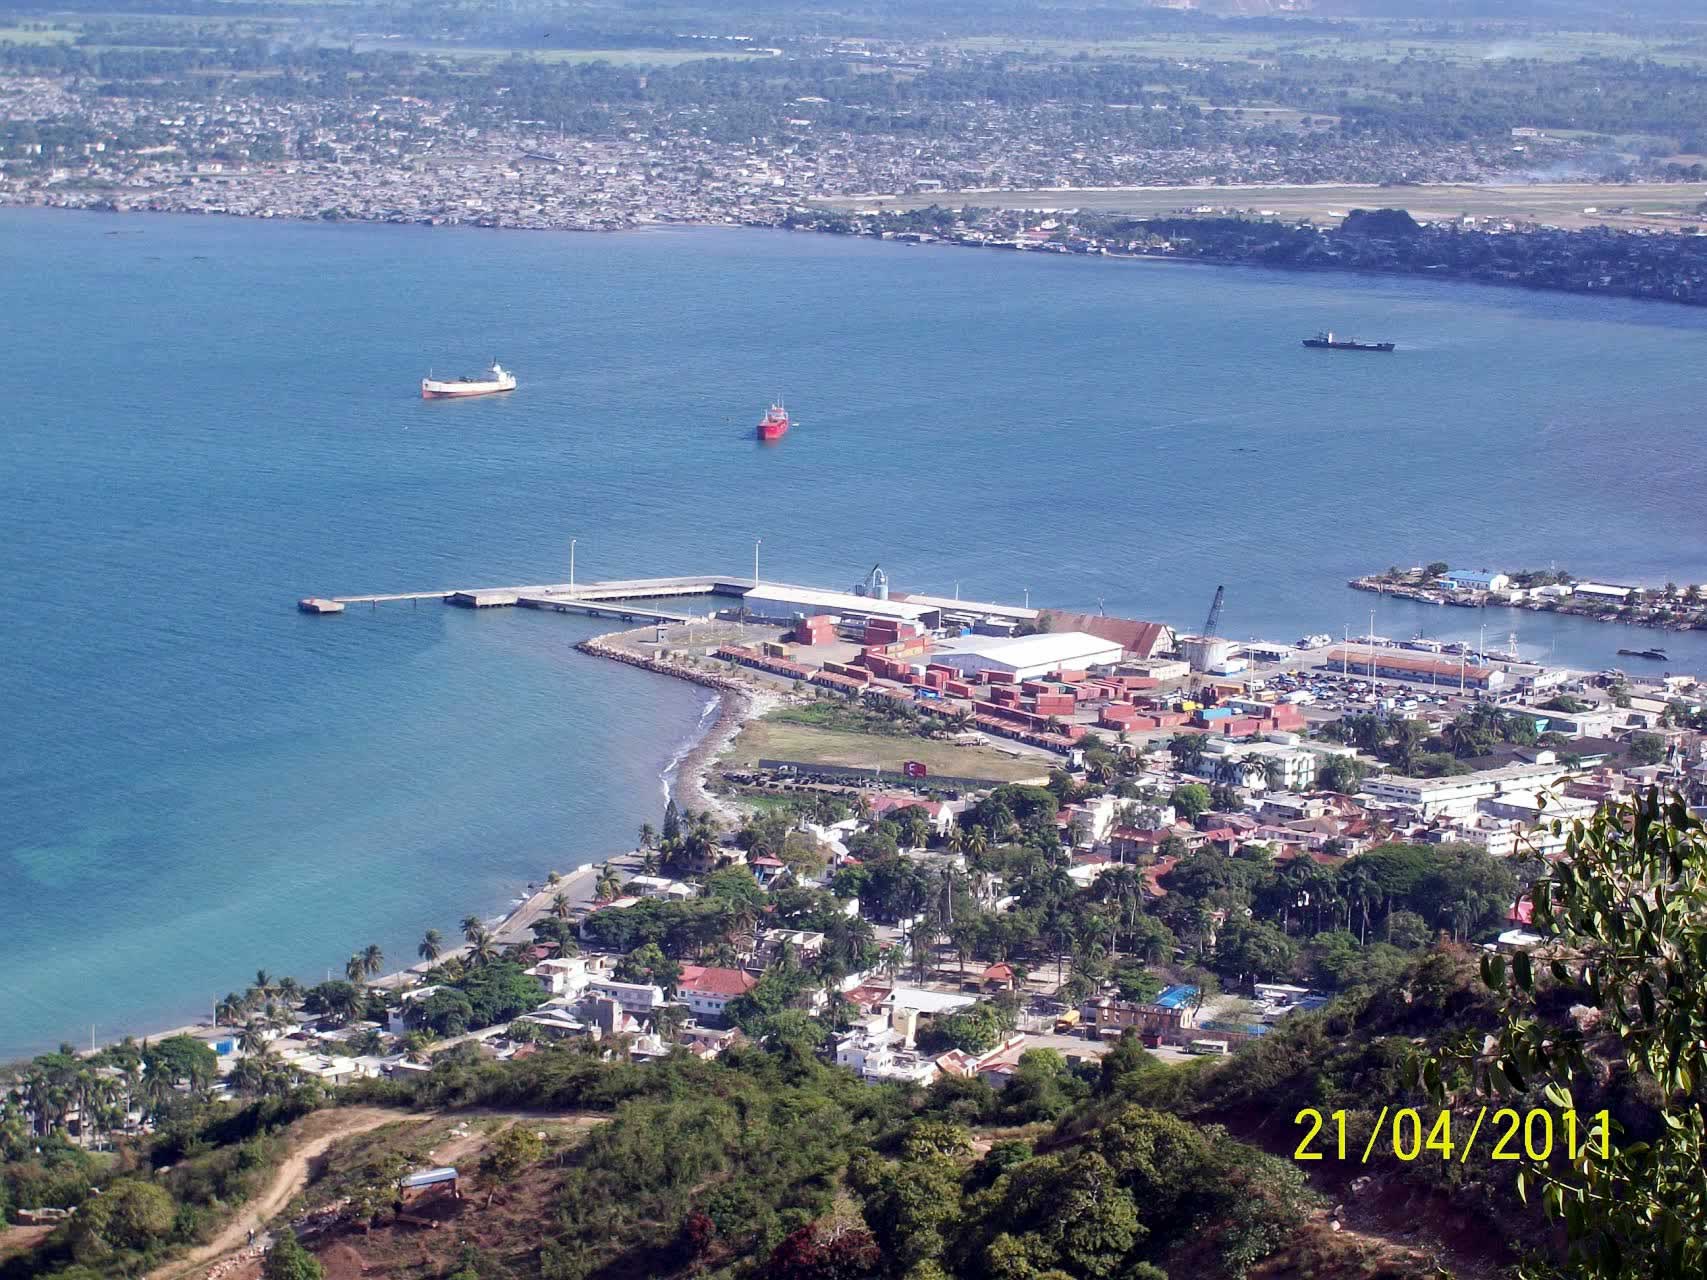 Aerial view of the port